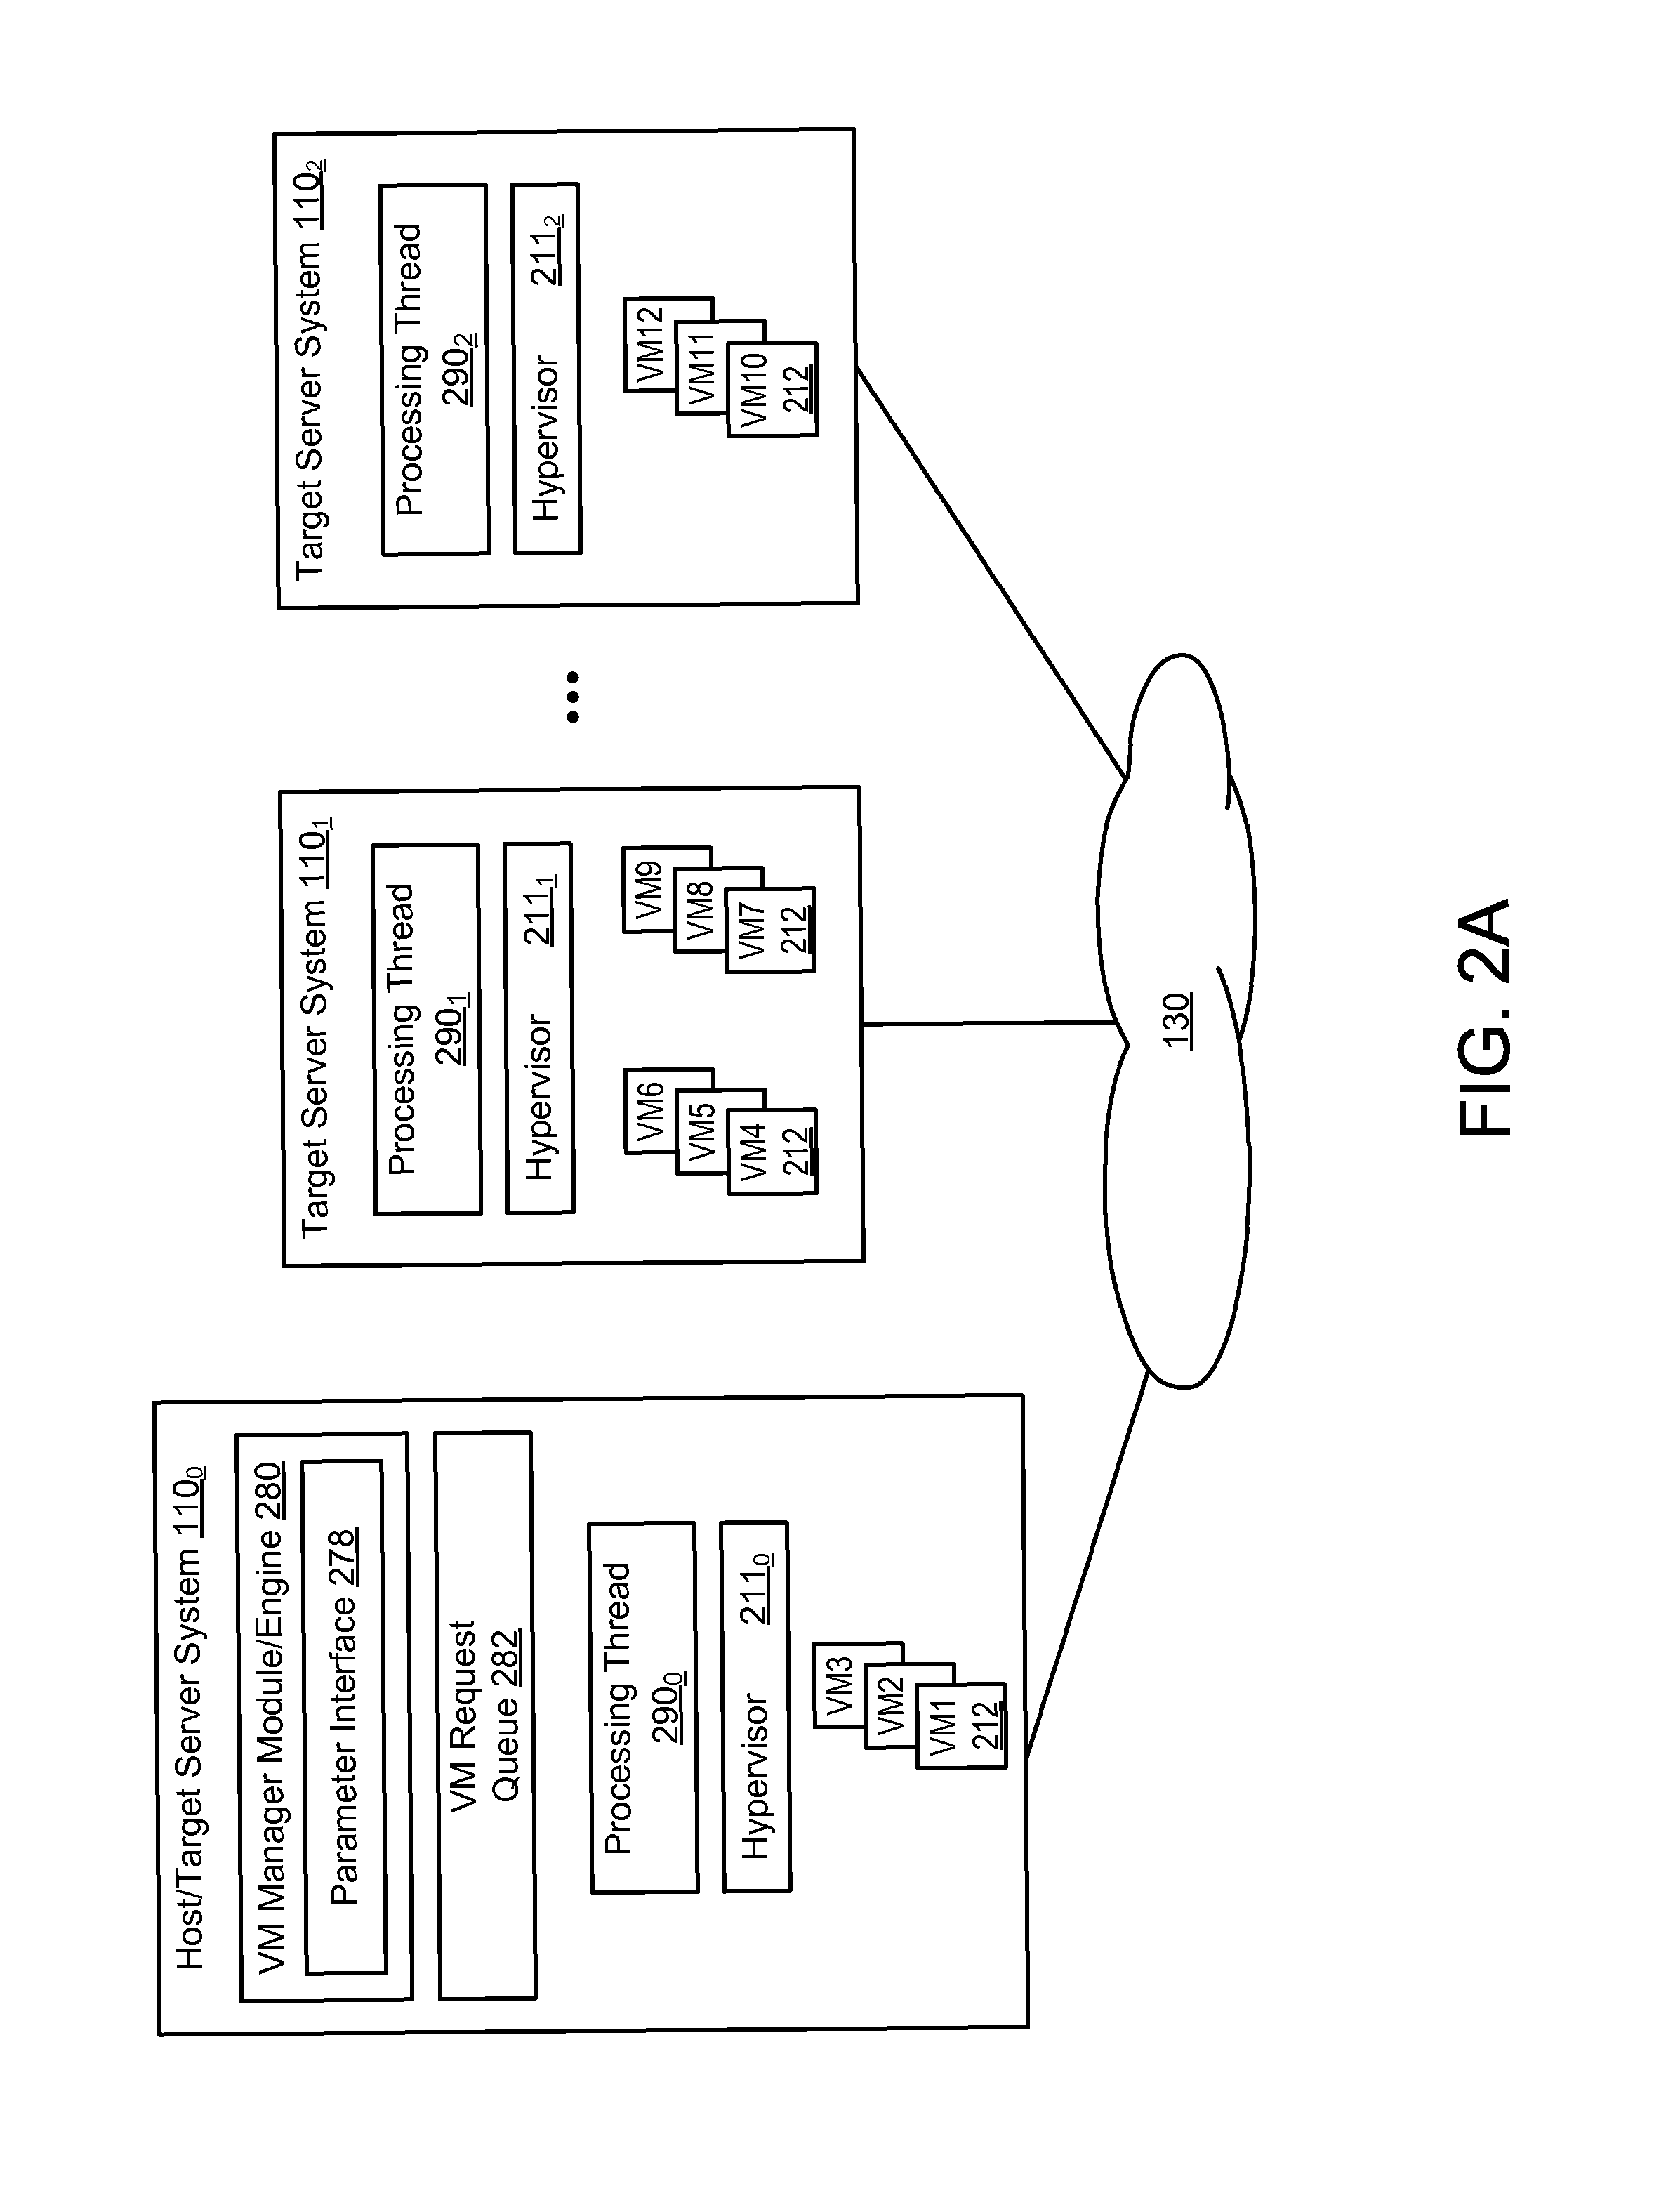 System and method for dynamic allocation of virtual machines in a virtual server environment